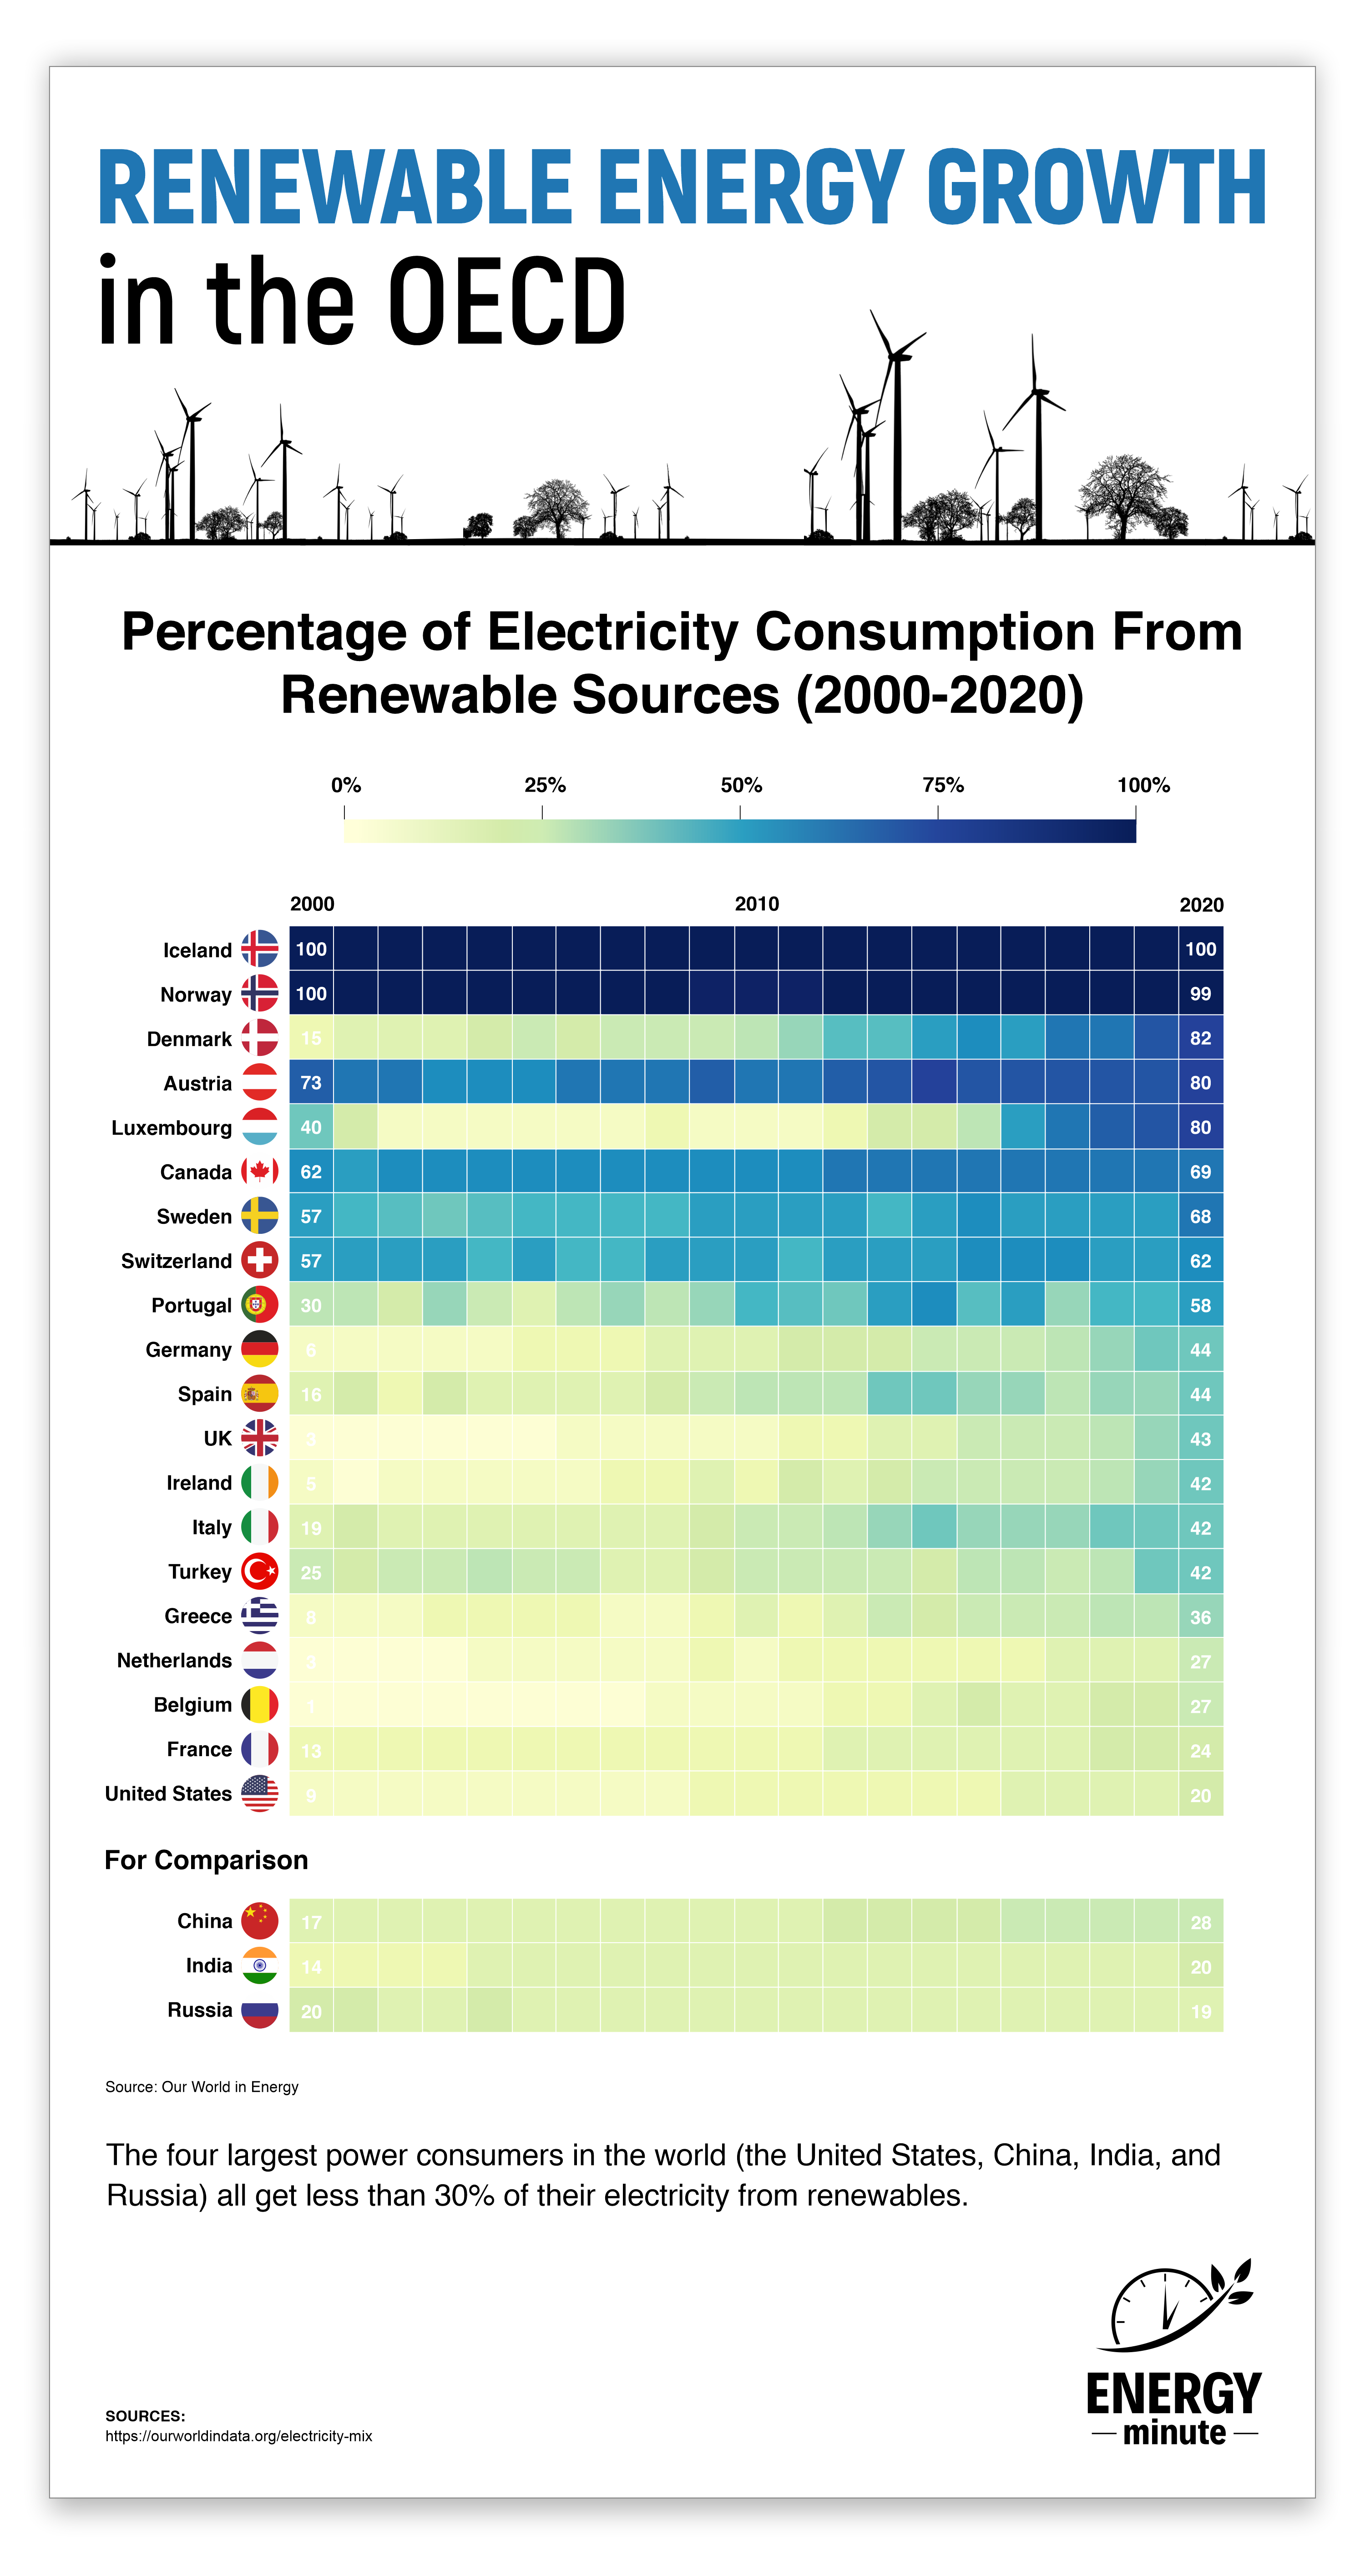 Renewable energy growth in OECD countries